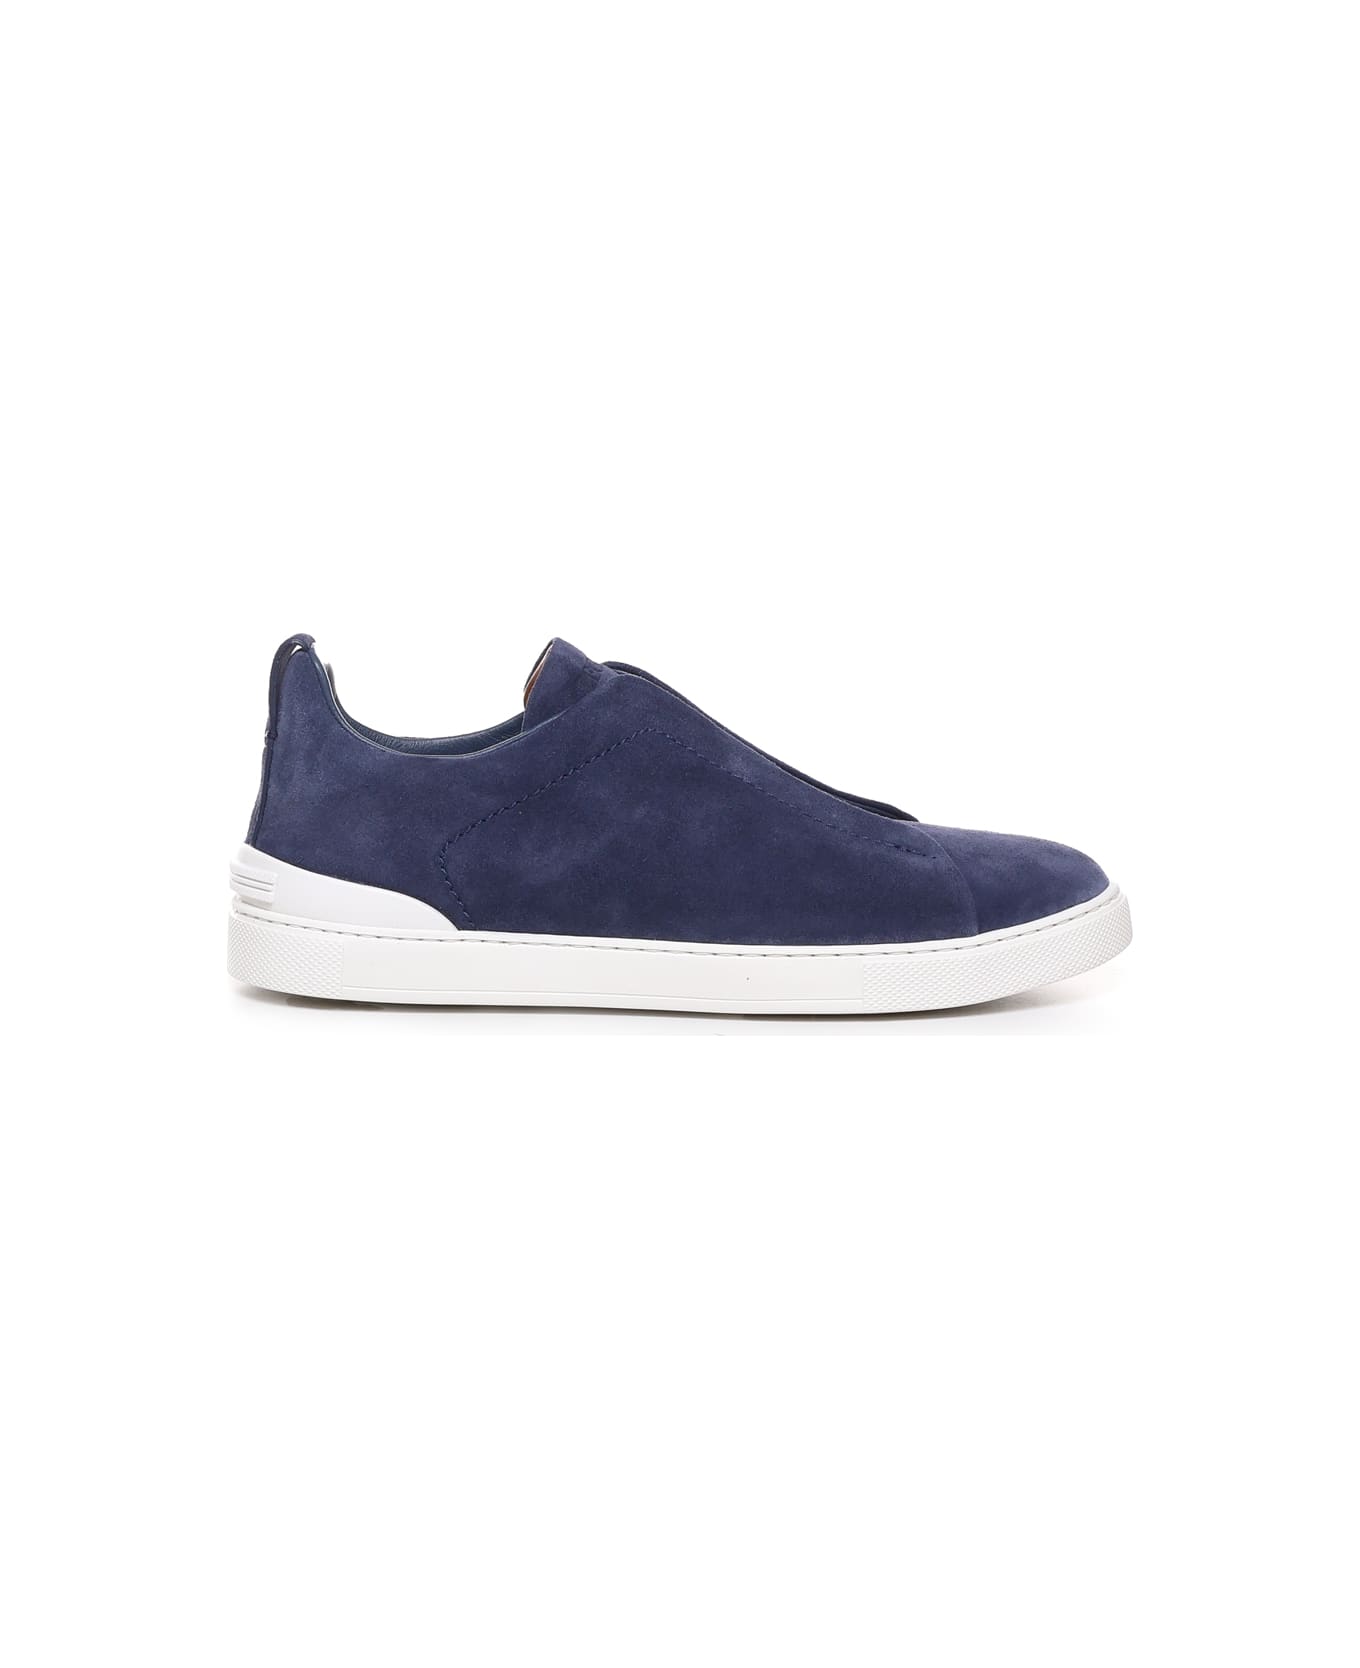 Zegna Sneakers Without Laces - Blue